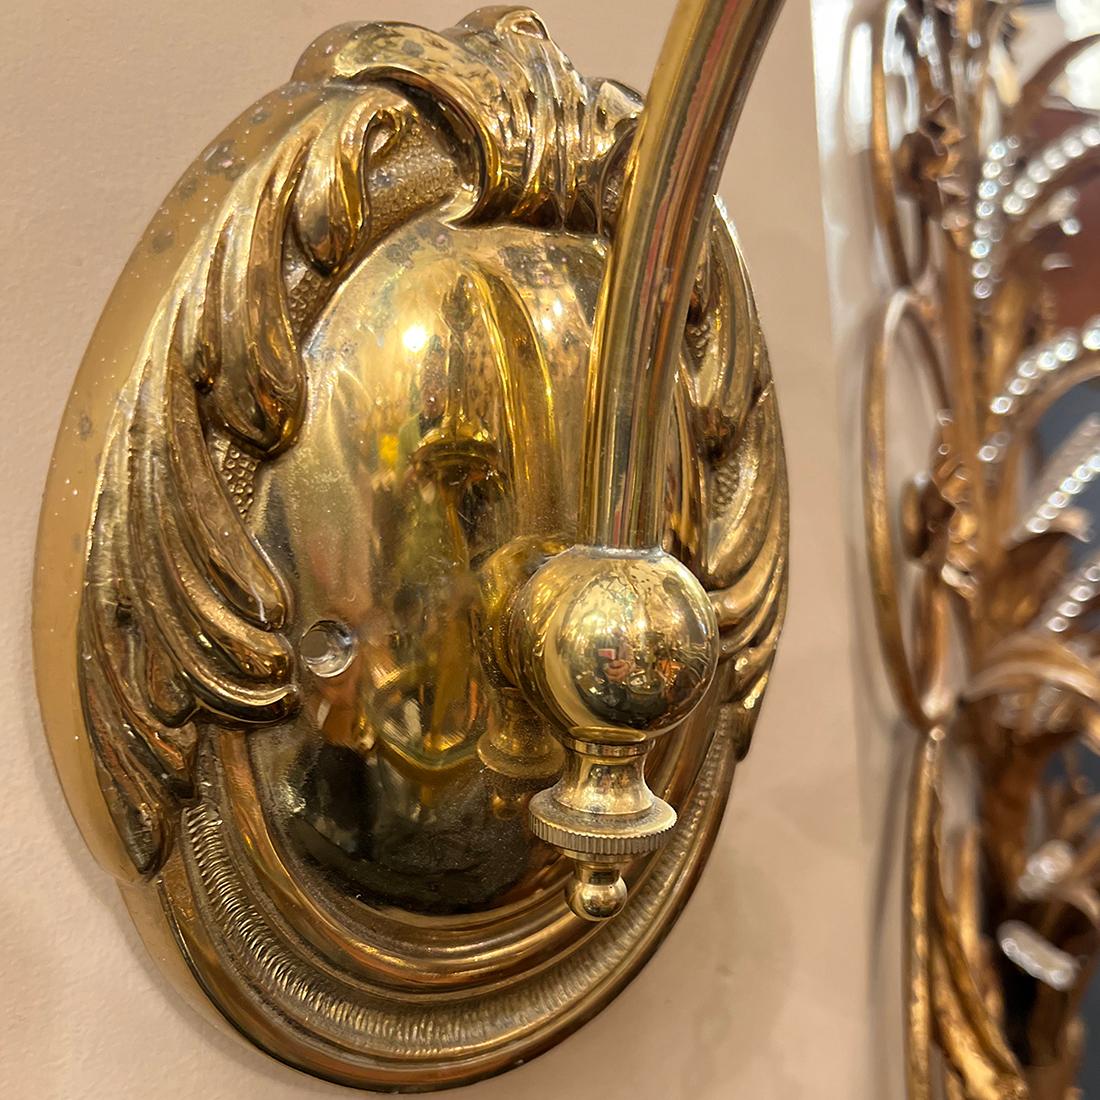 Pair of circa 1950's bronze sconces with hanging bell jar shade.

Measurements:
Height: 16.25